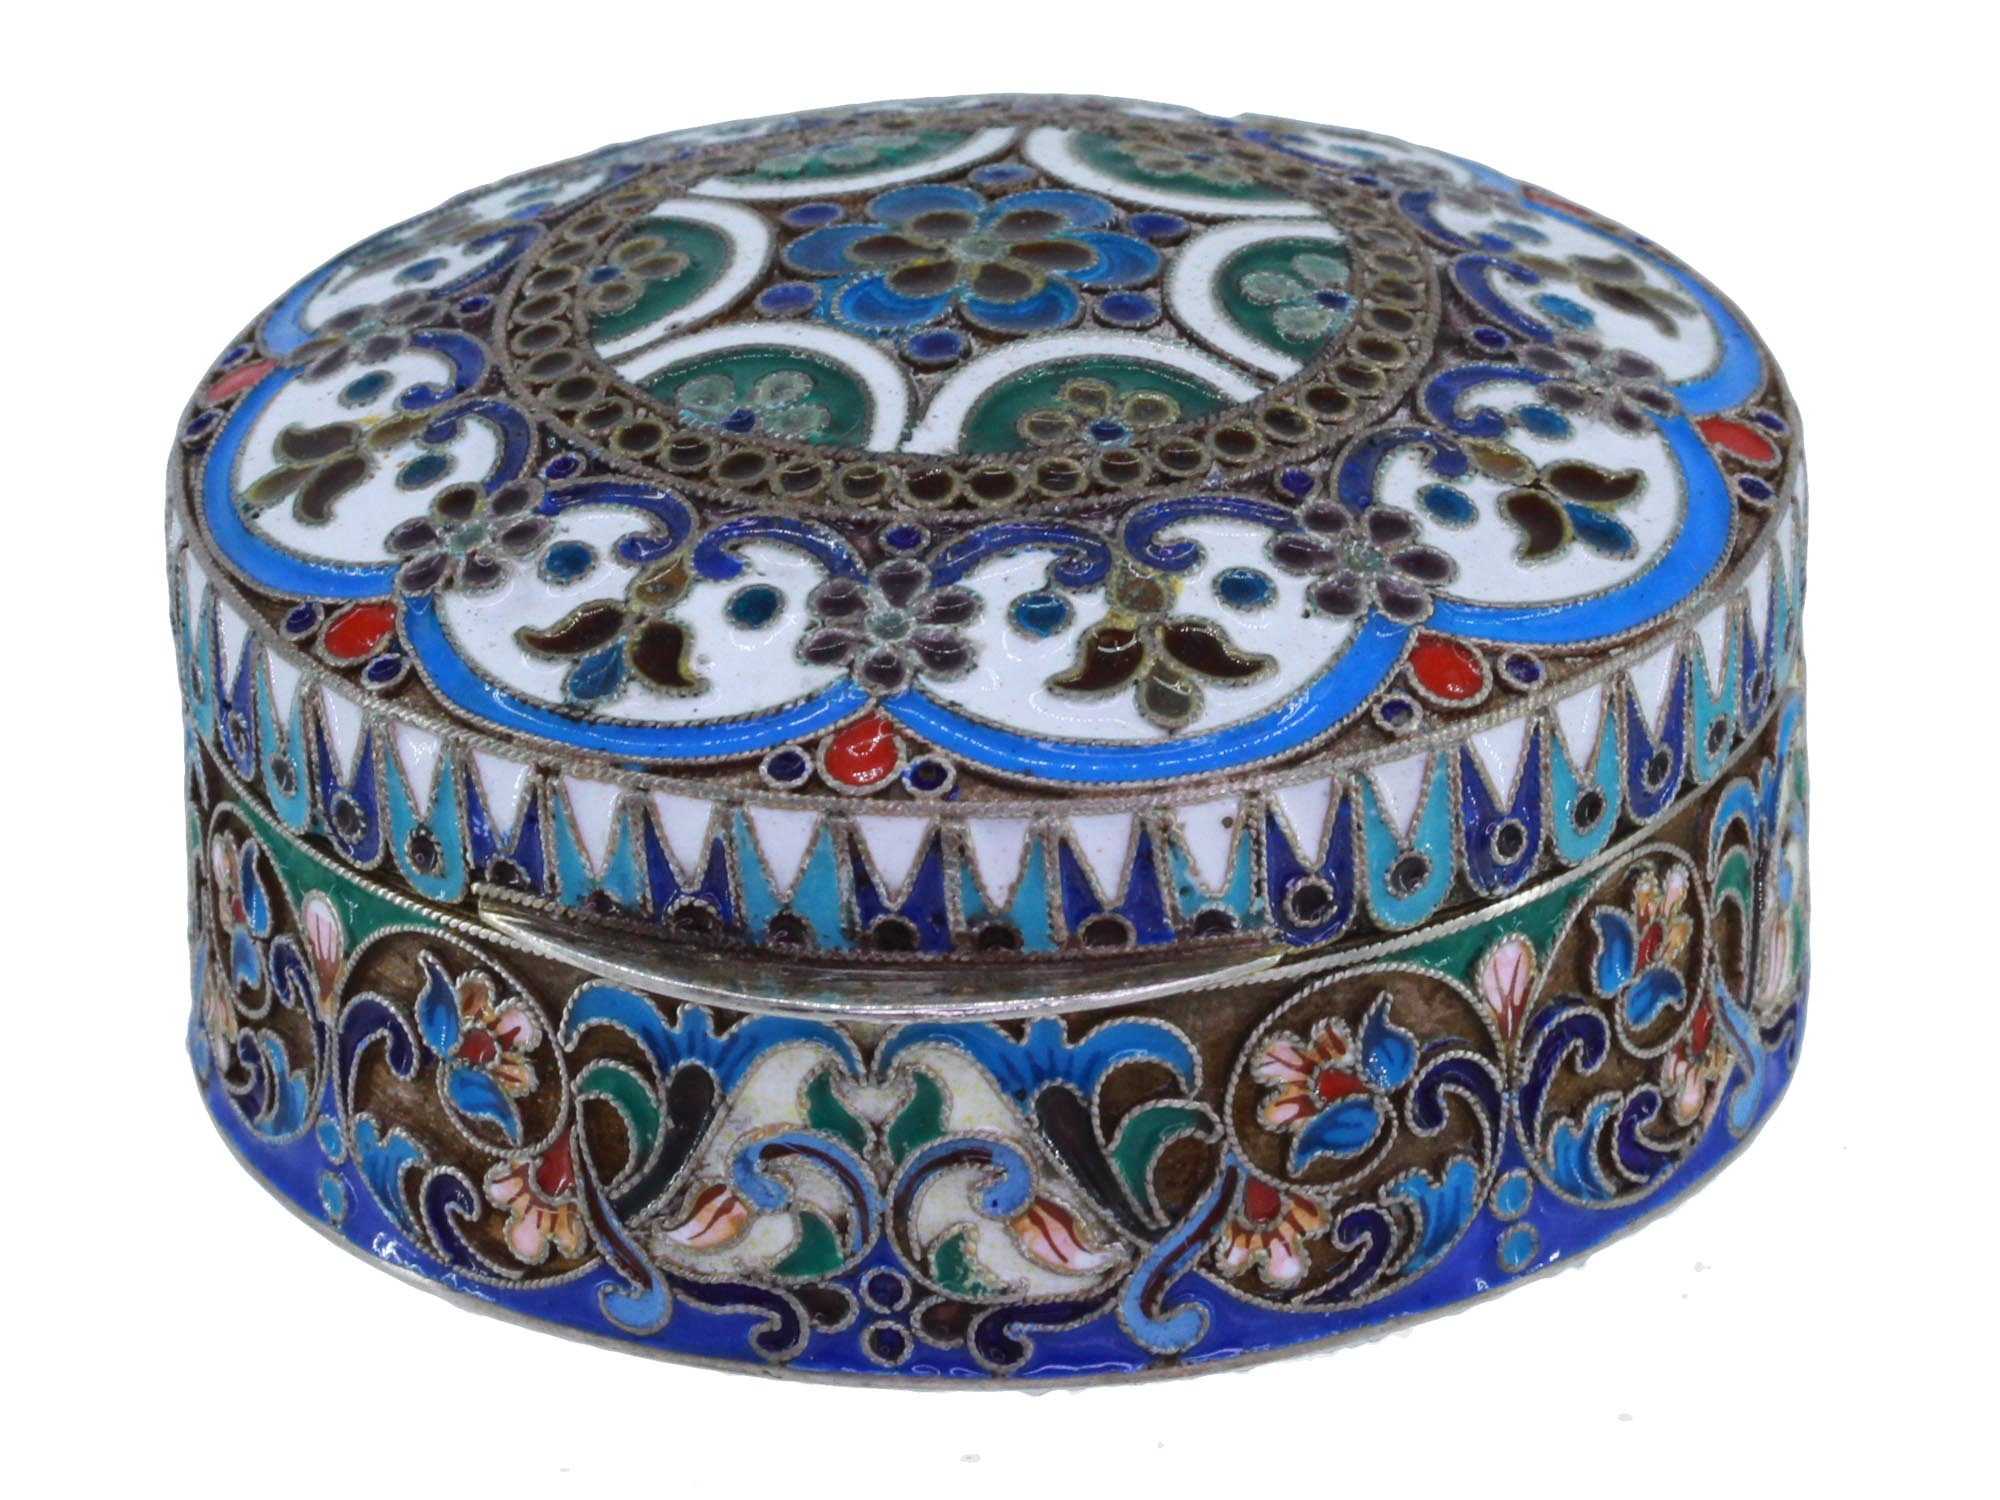 RUSSIAN SILVER AND CLOISONNE ENAMEL TRINKET BOX PIC-0